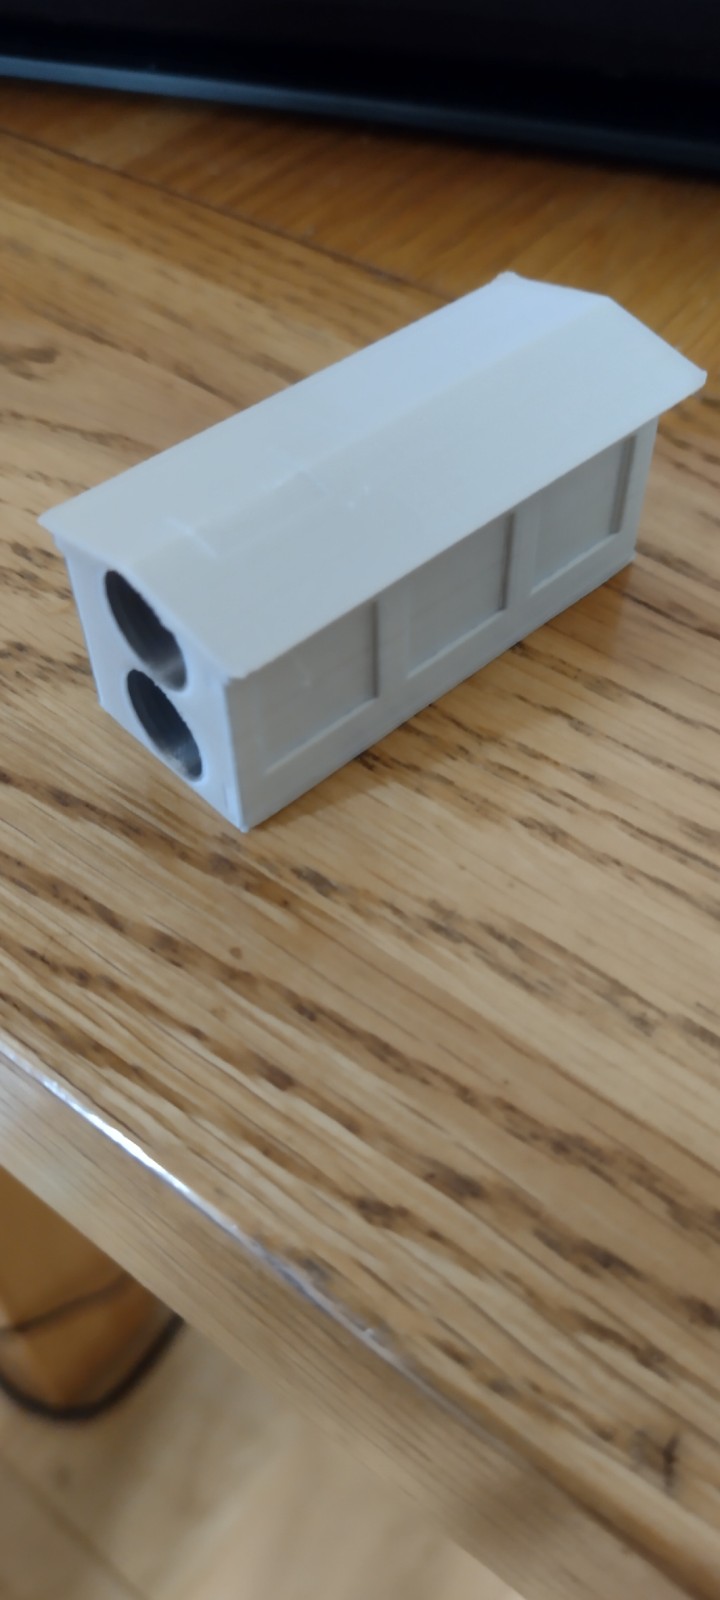 3D printable electric Ikea / Brio Train for wooden track